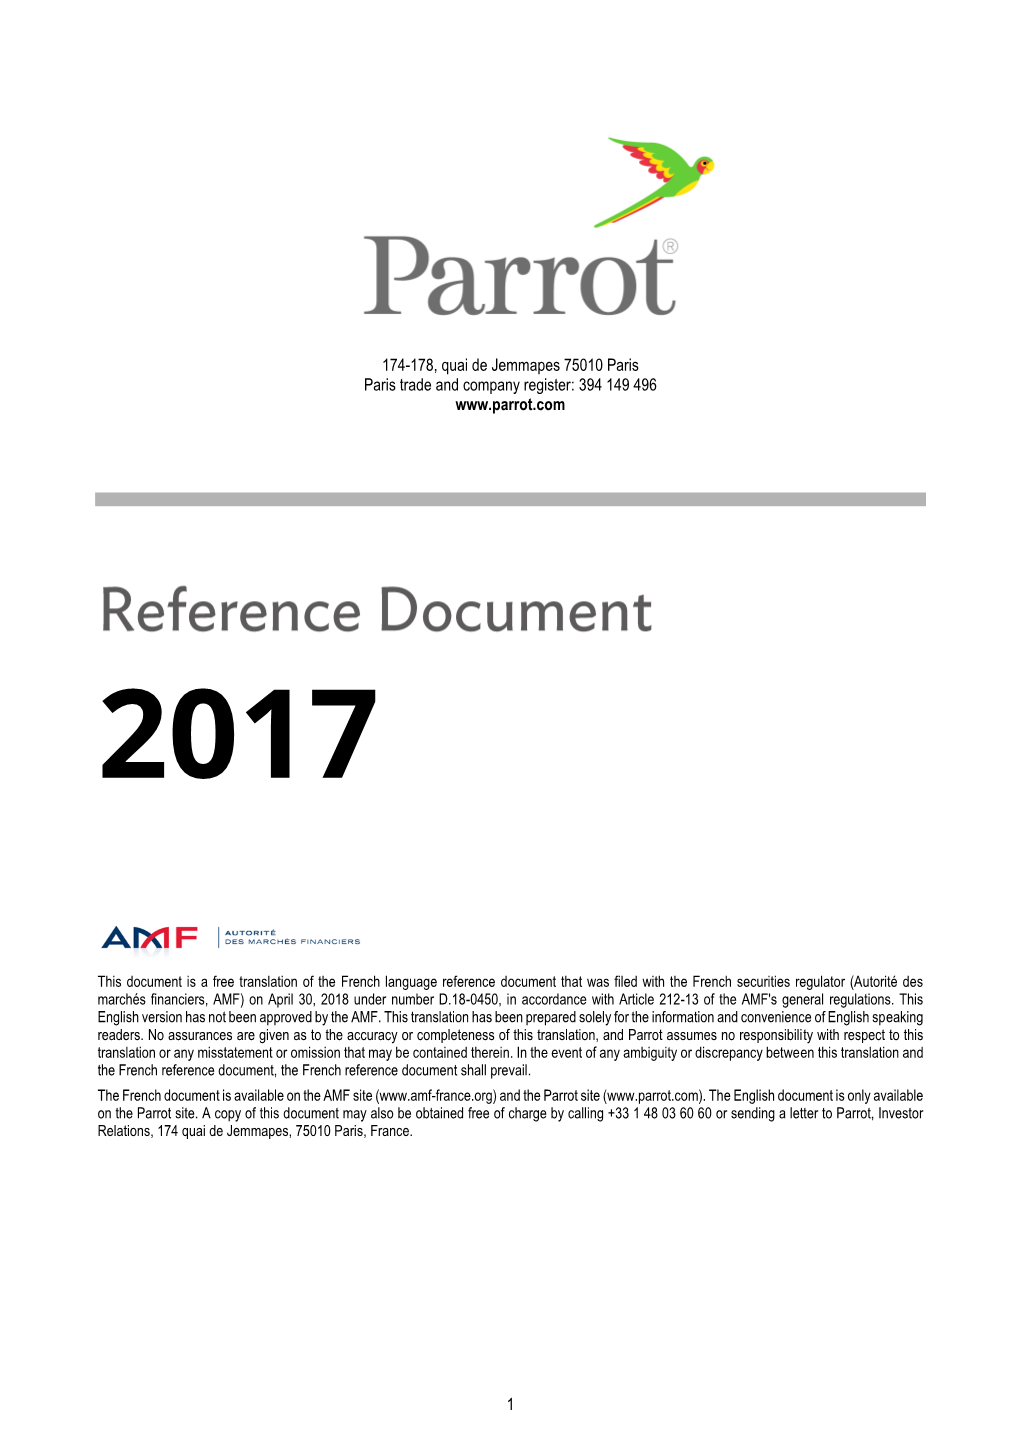 2017 Annual Report / Reference Document